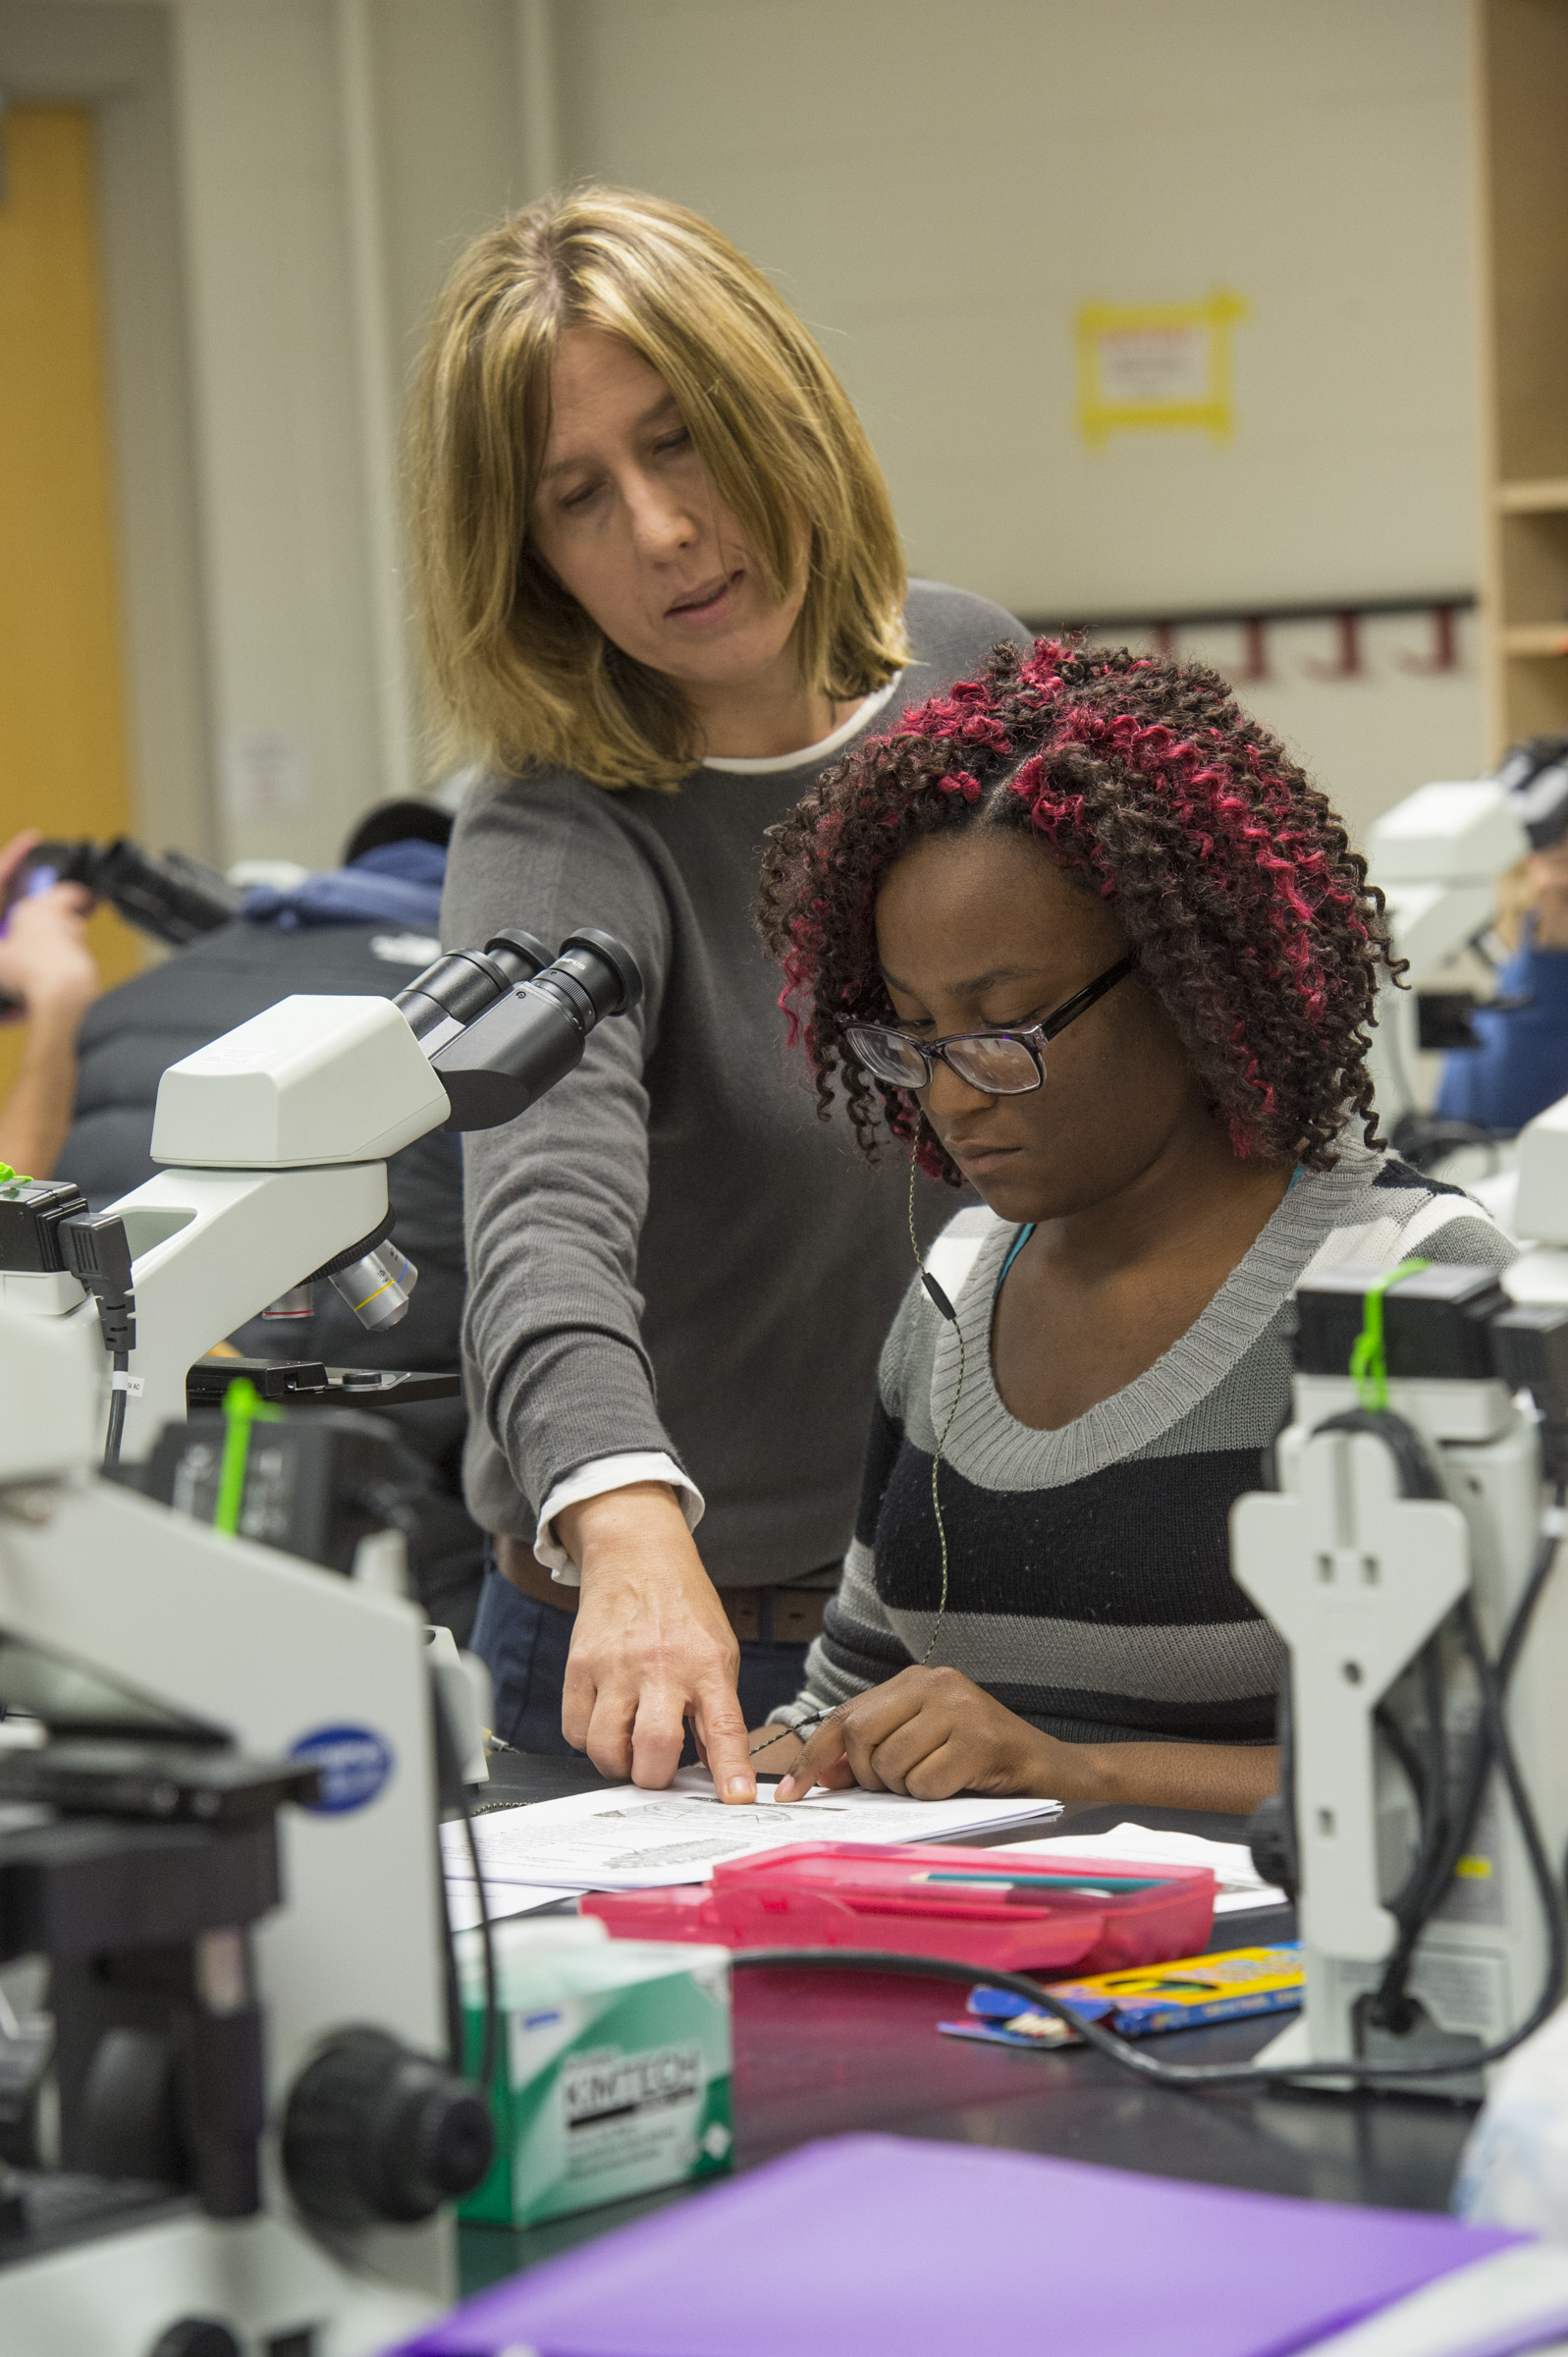 Dr. Edie Hardcastle works closely with a student at a microscope